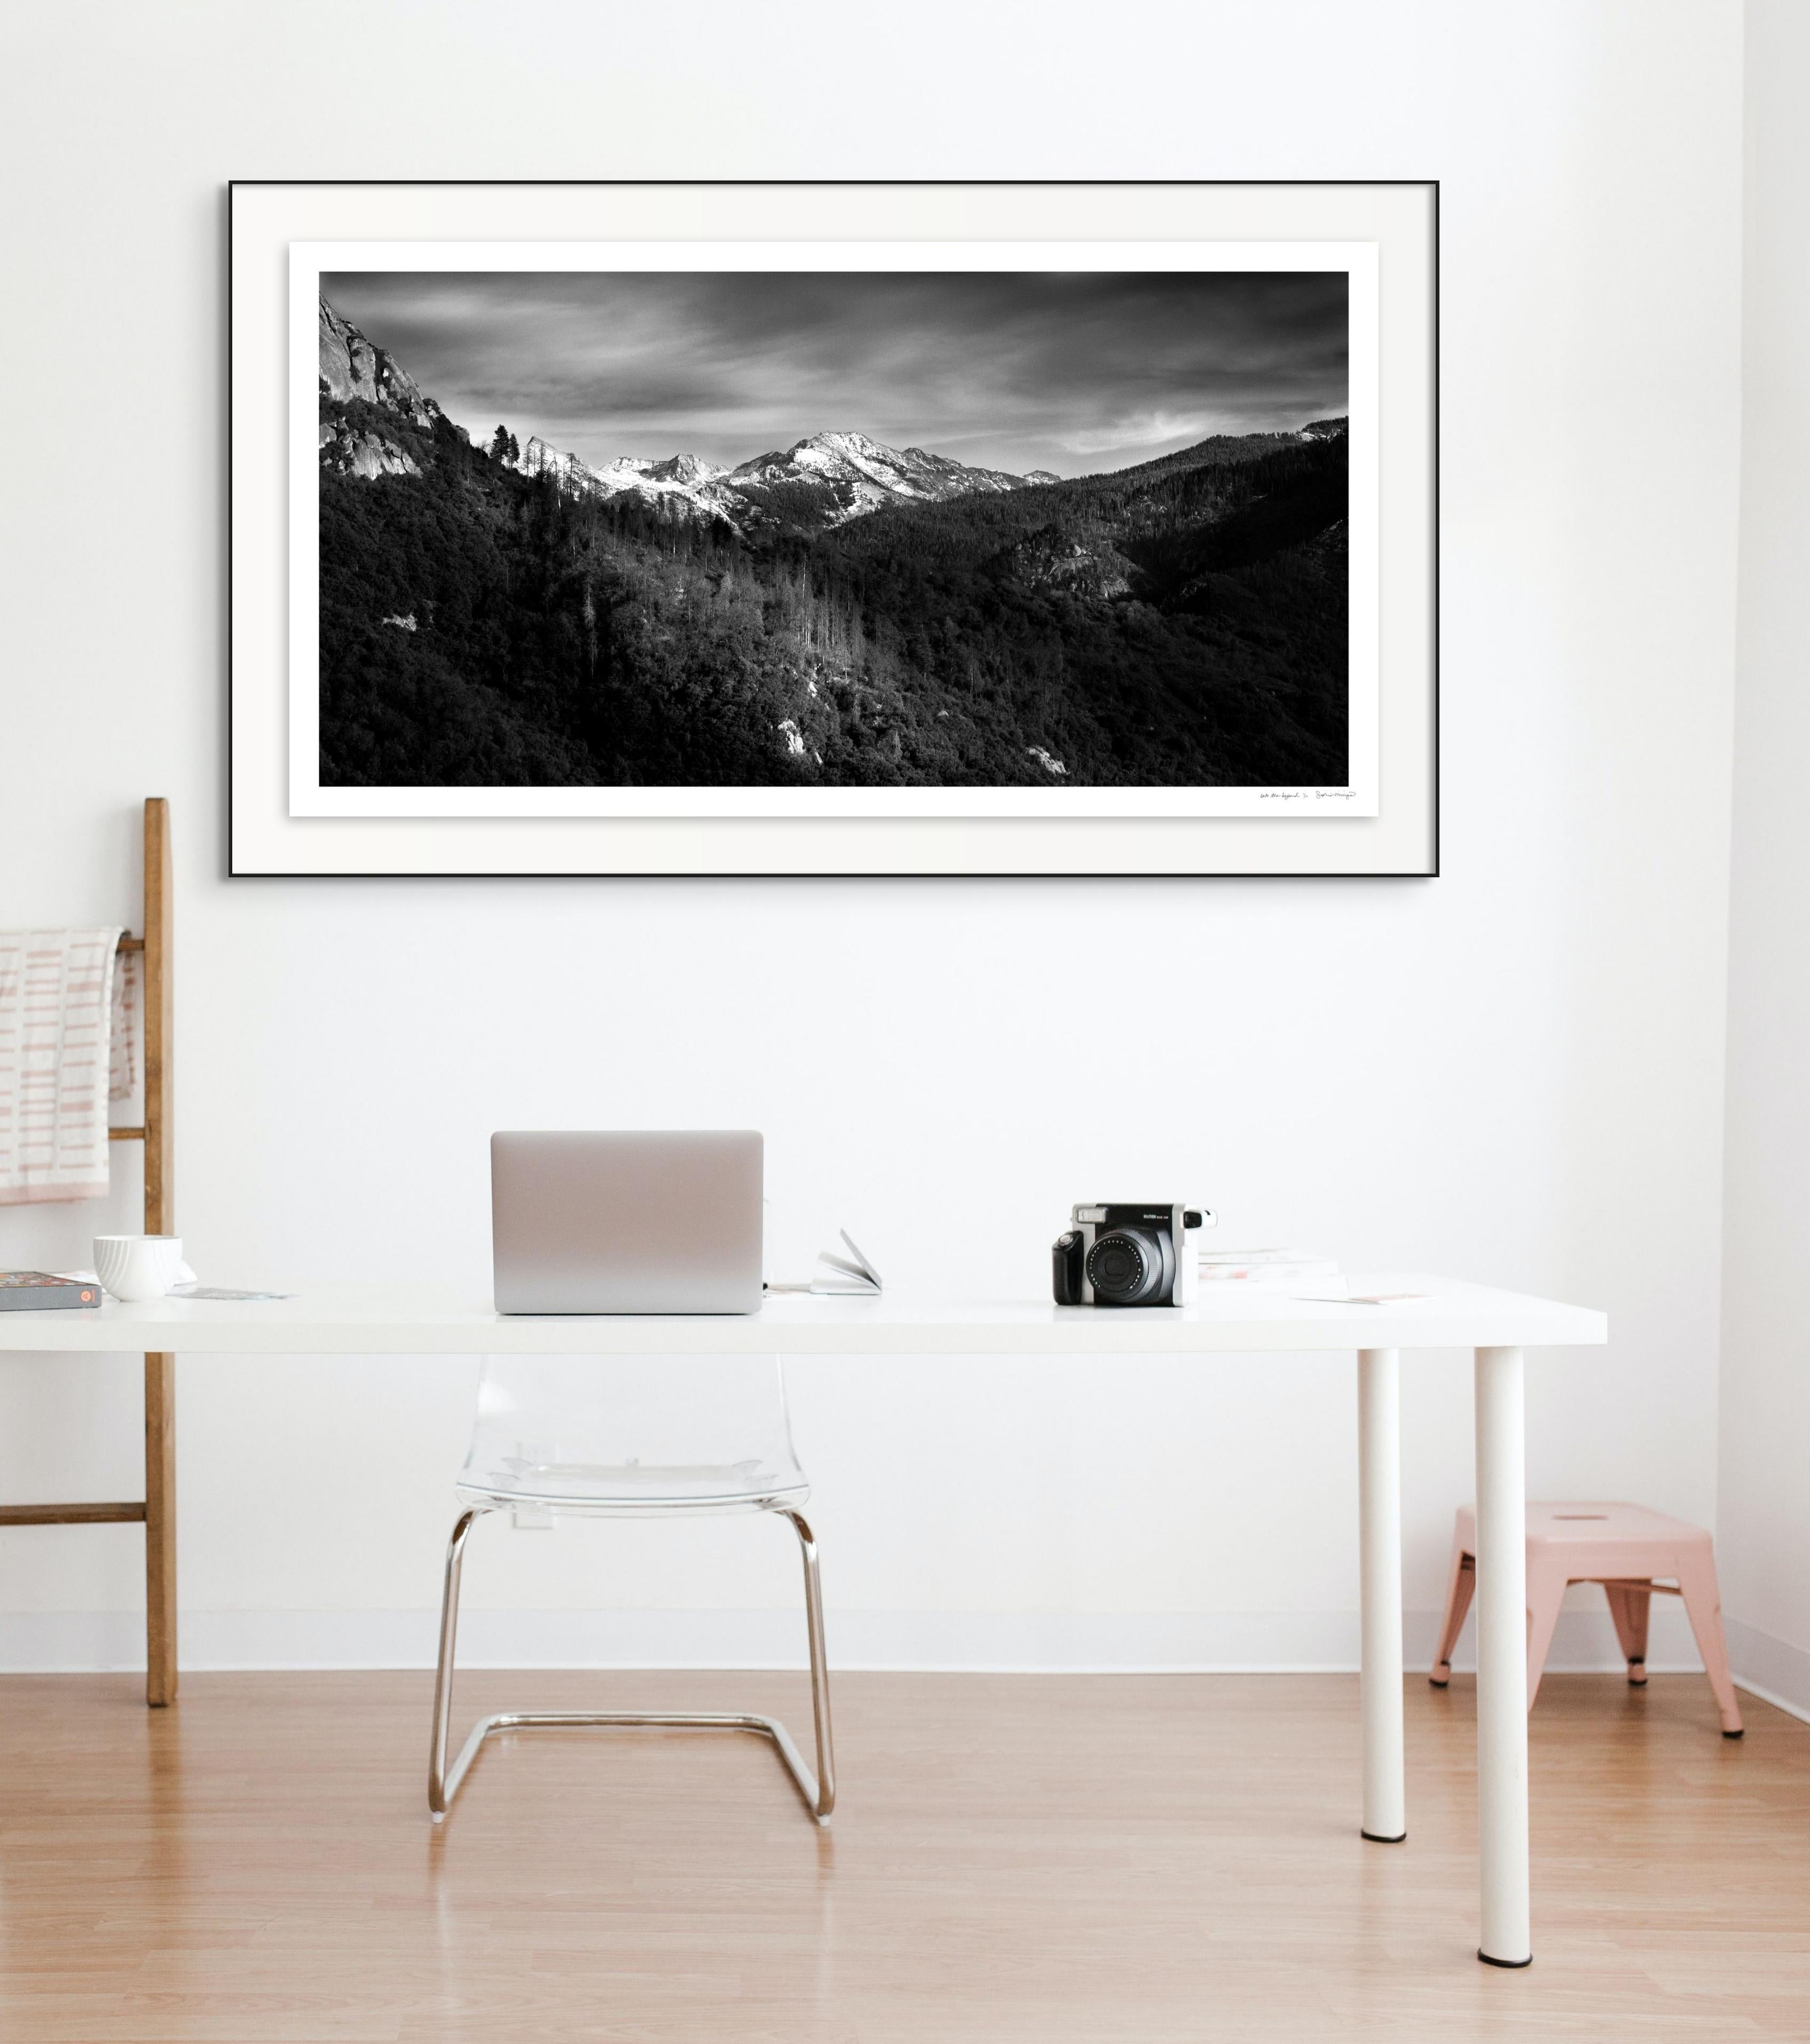 'Into the Beyond' 
Limited edition archival photograph. Unframed, hand signed and numbered
_________________
Painted pools of light dance across the richly layered mountainscape of the Sierra Nevada, California. 
Sophia's poetic photographs are an